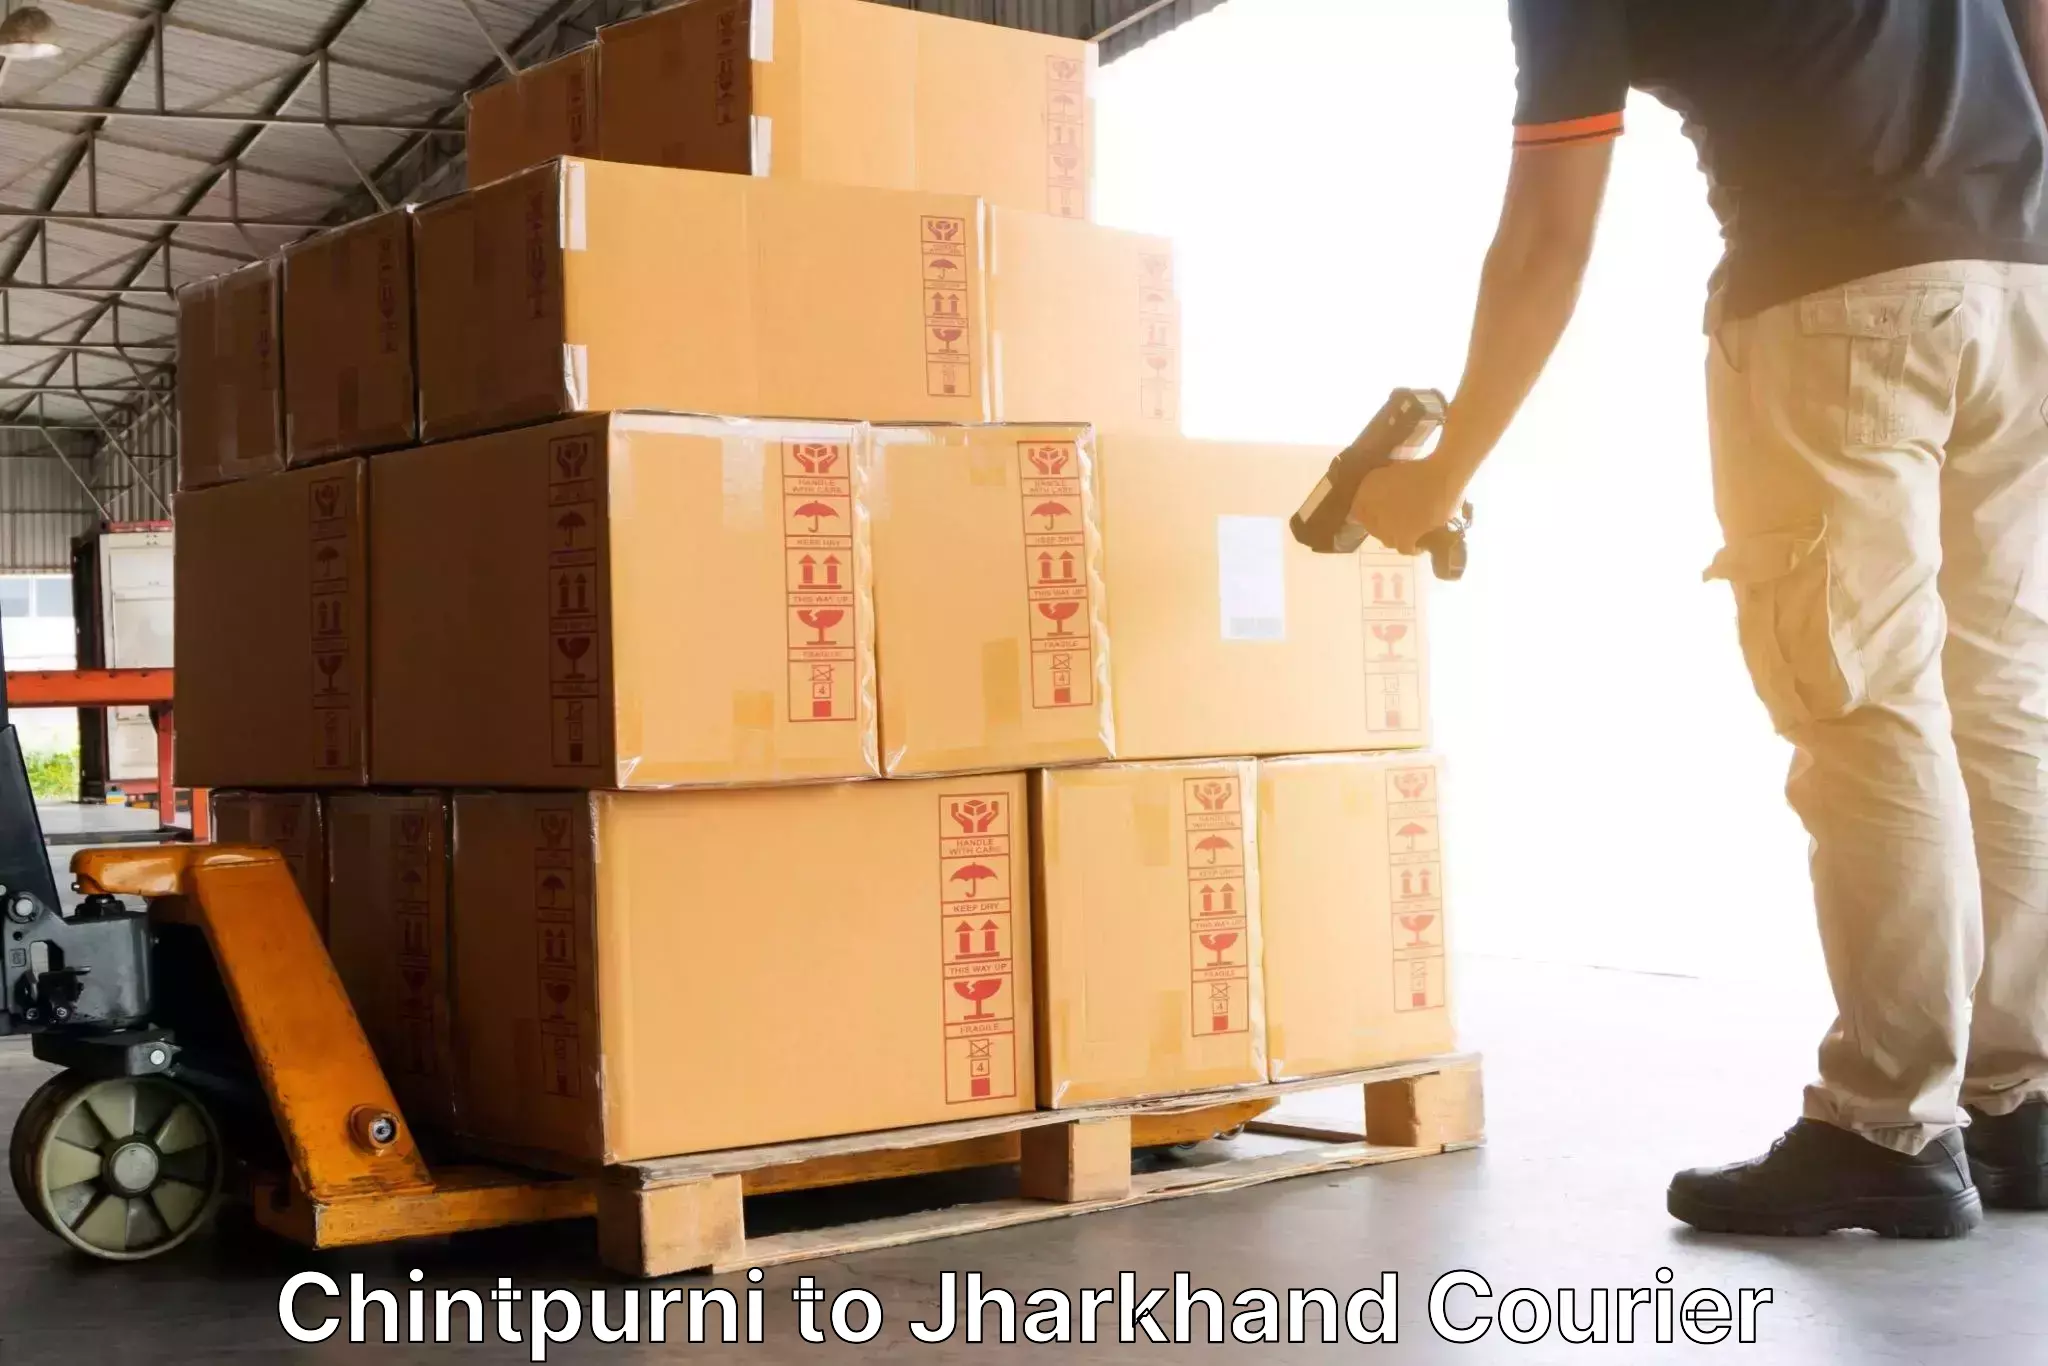 Express package delivery Chintpurni to Padma Hazaribagh